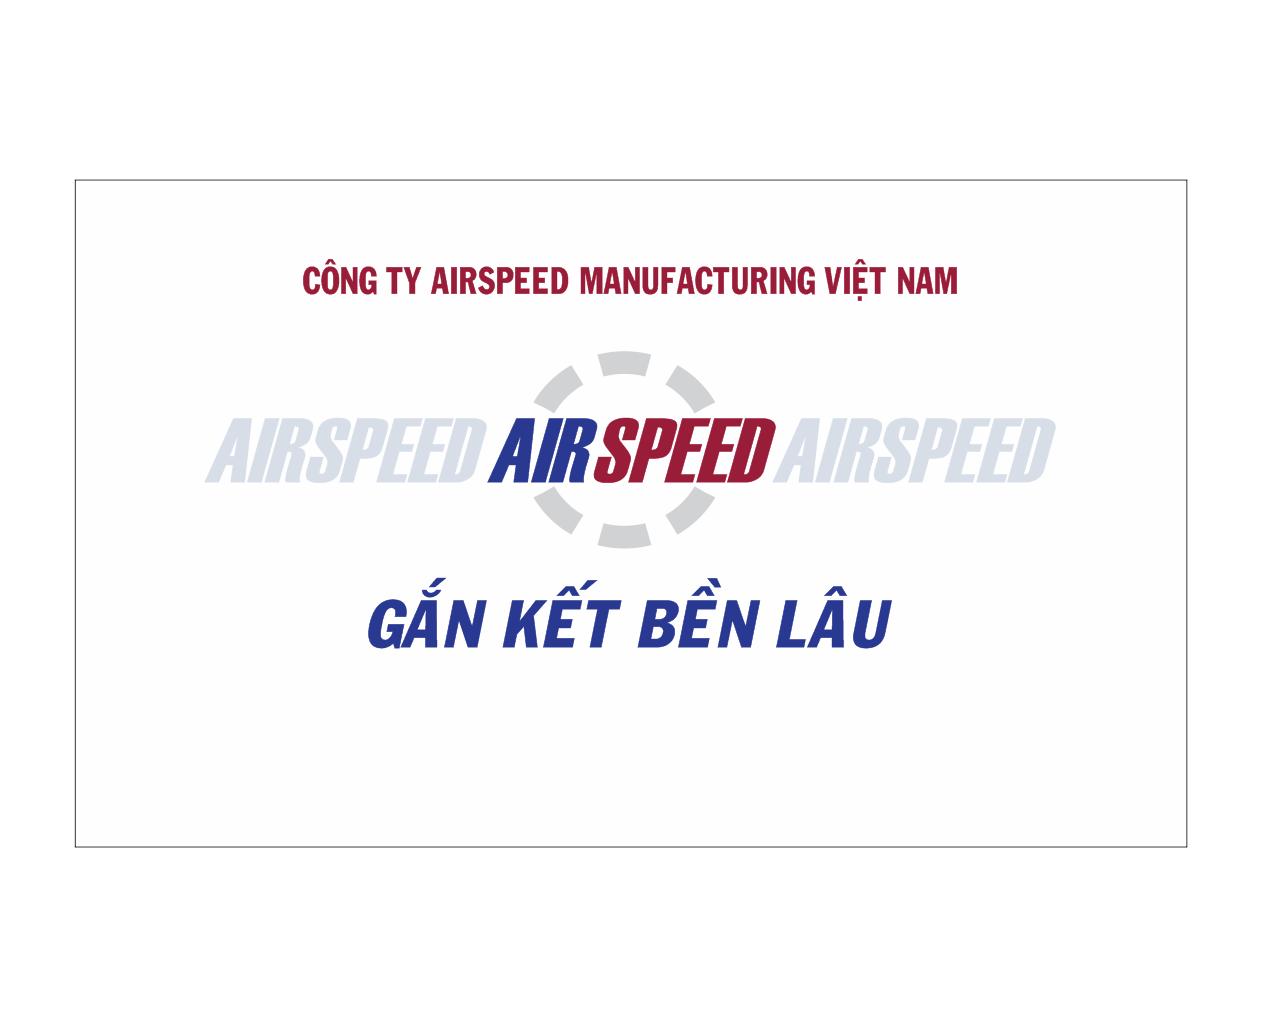 Công ty TNHH Airspeed Manufacturing Việt Nam	